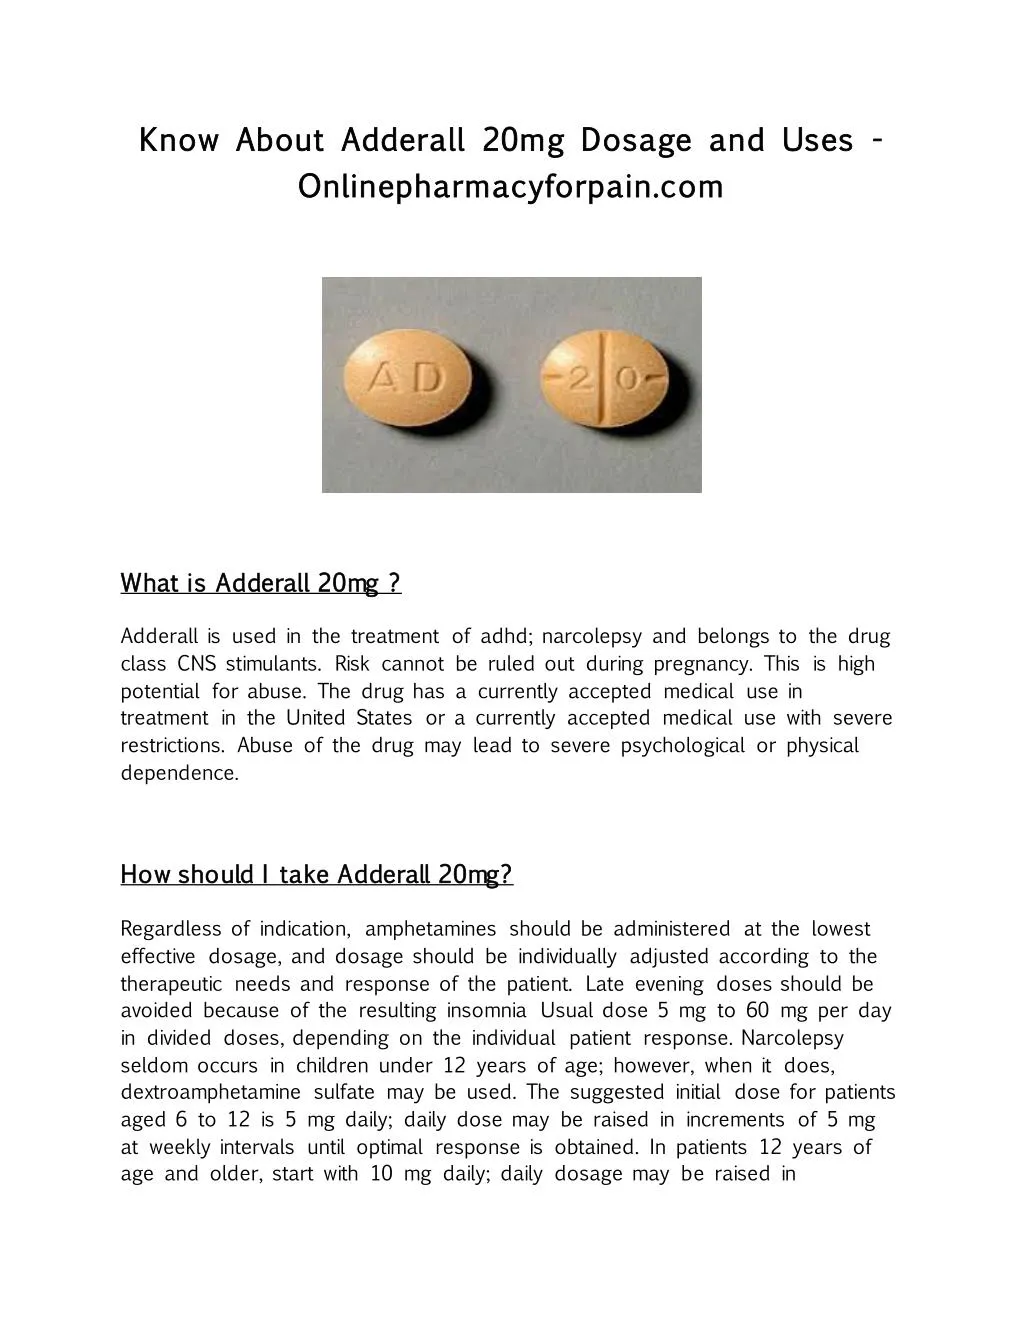 know about adderall 20mg dosage and uses know